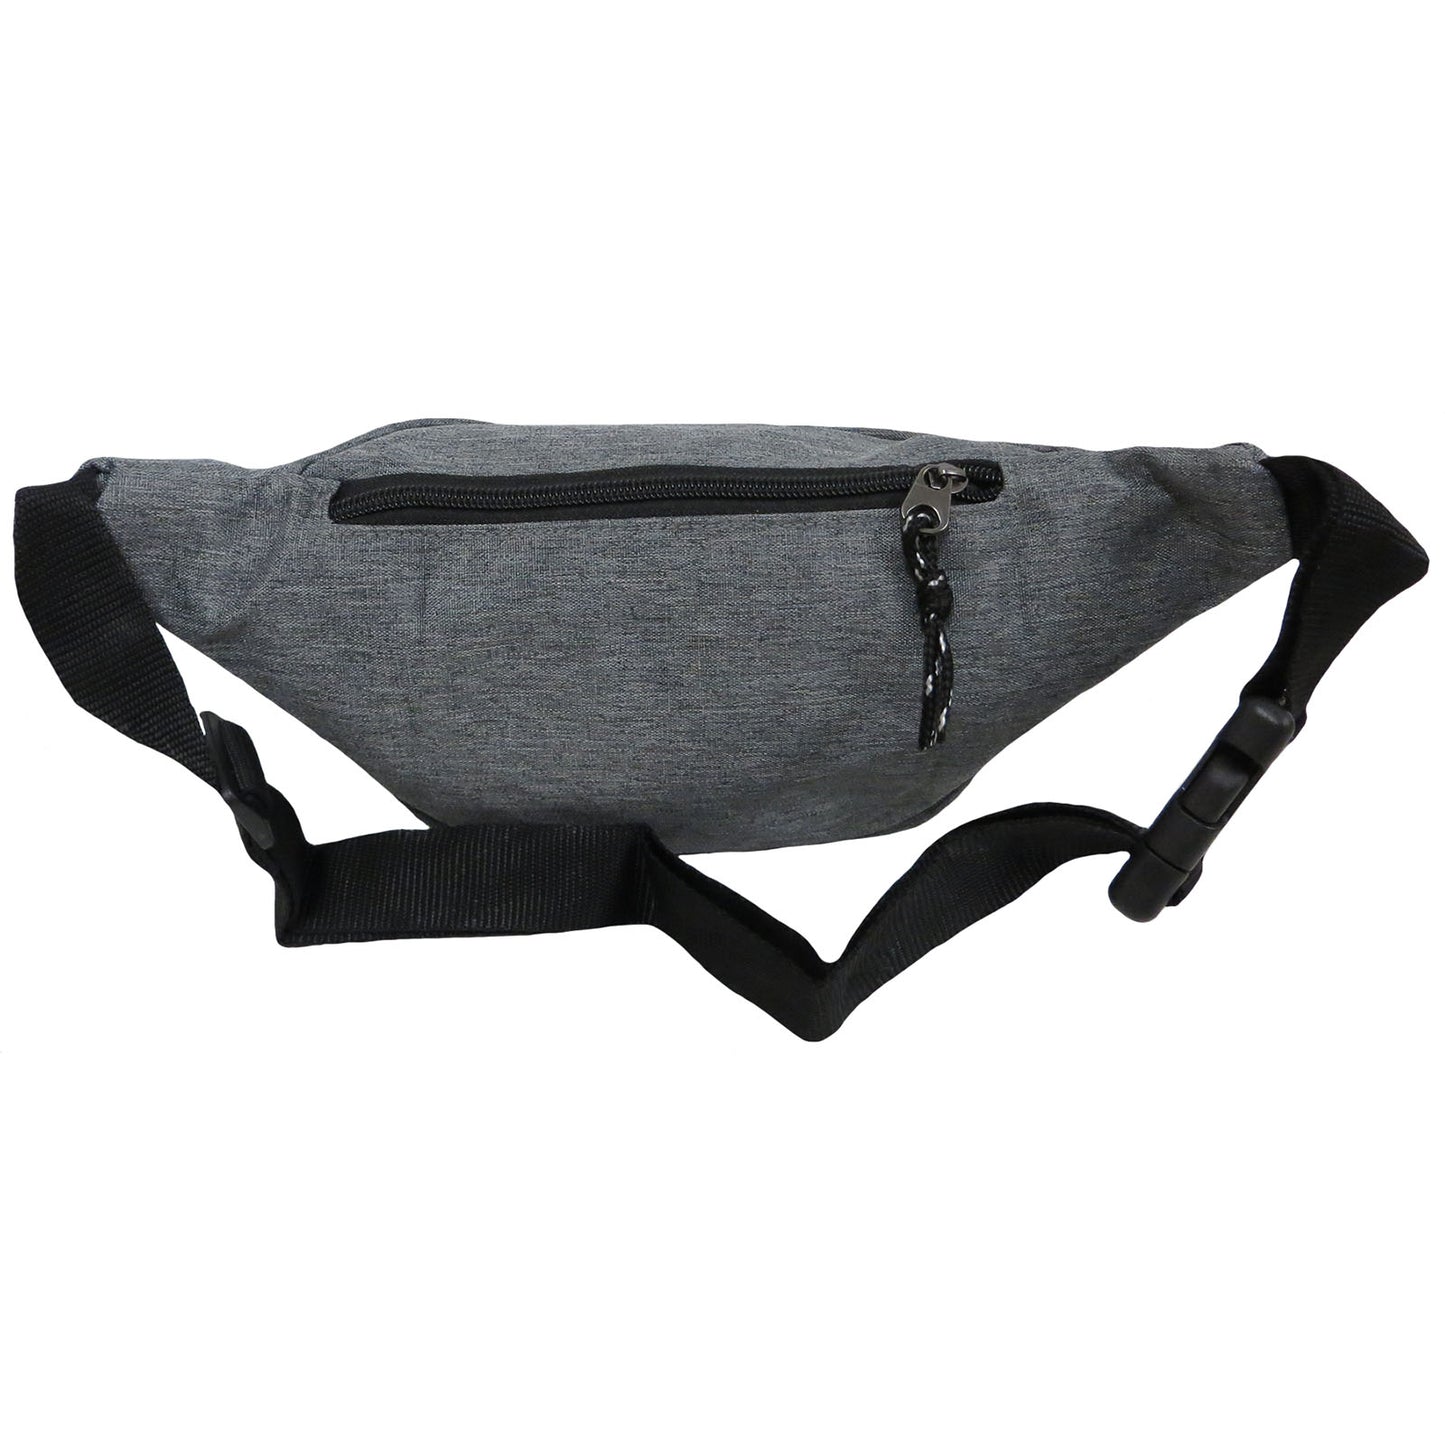 ITEM NUMBER: FB8157-TAYLOR-GRAY (6 PIECE PACK - $4.25 / PIECE) 4 COMPARTMENT FANNY BAG IN GRAY